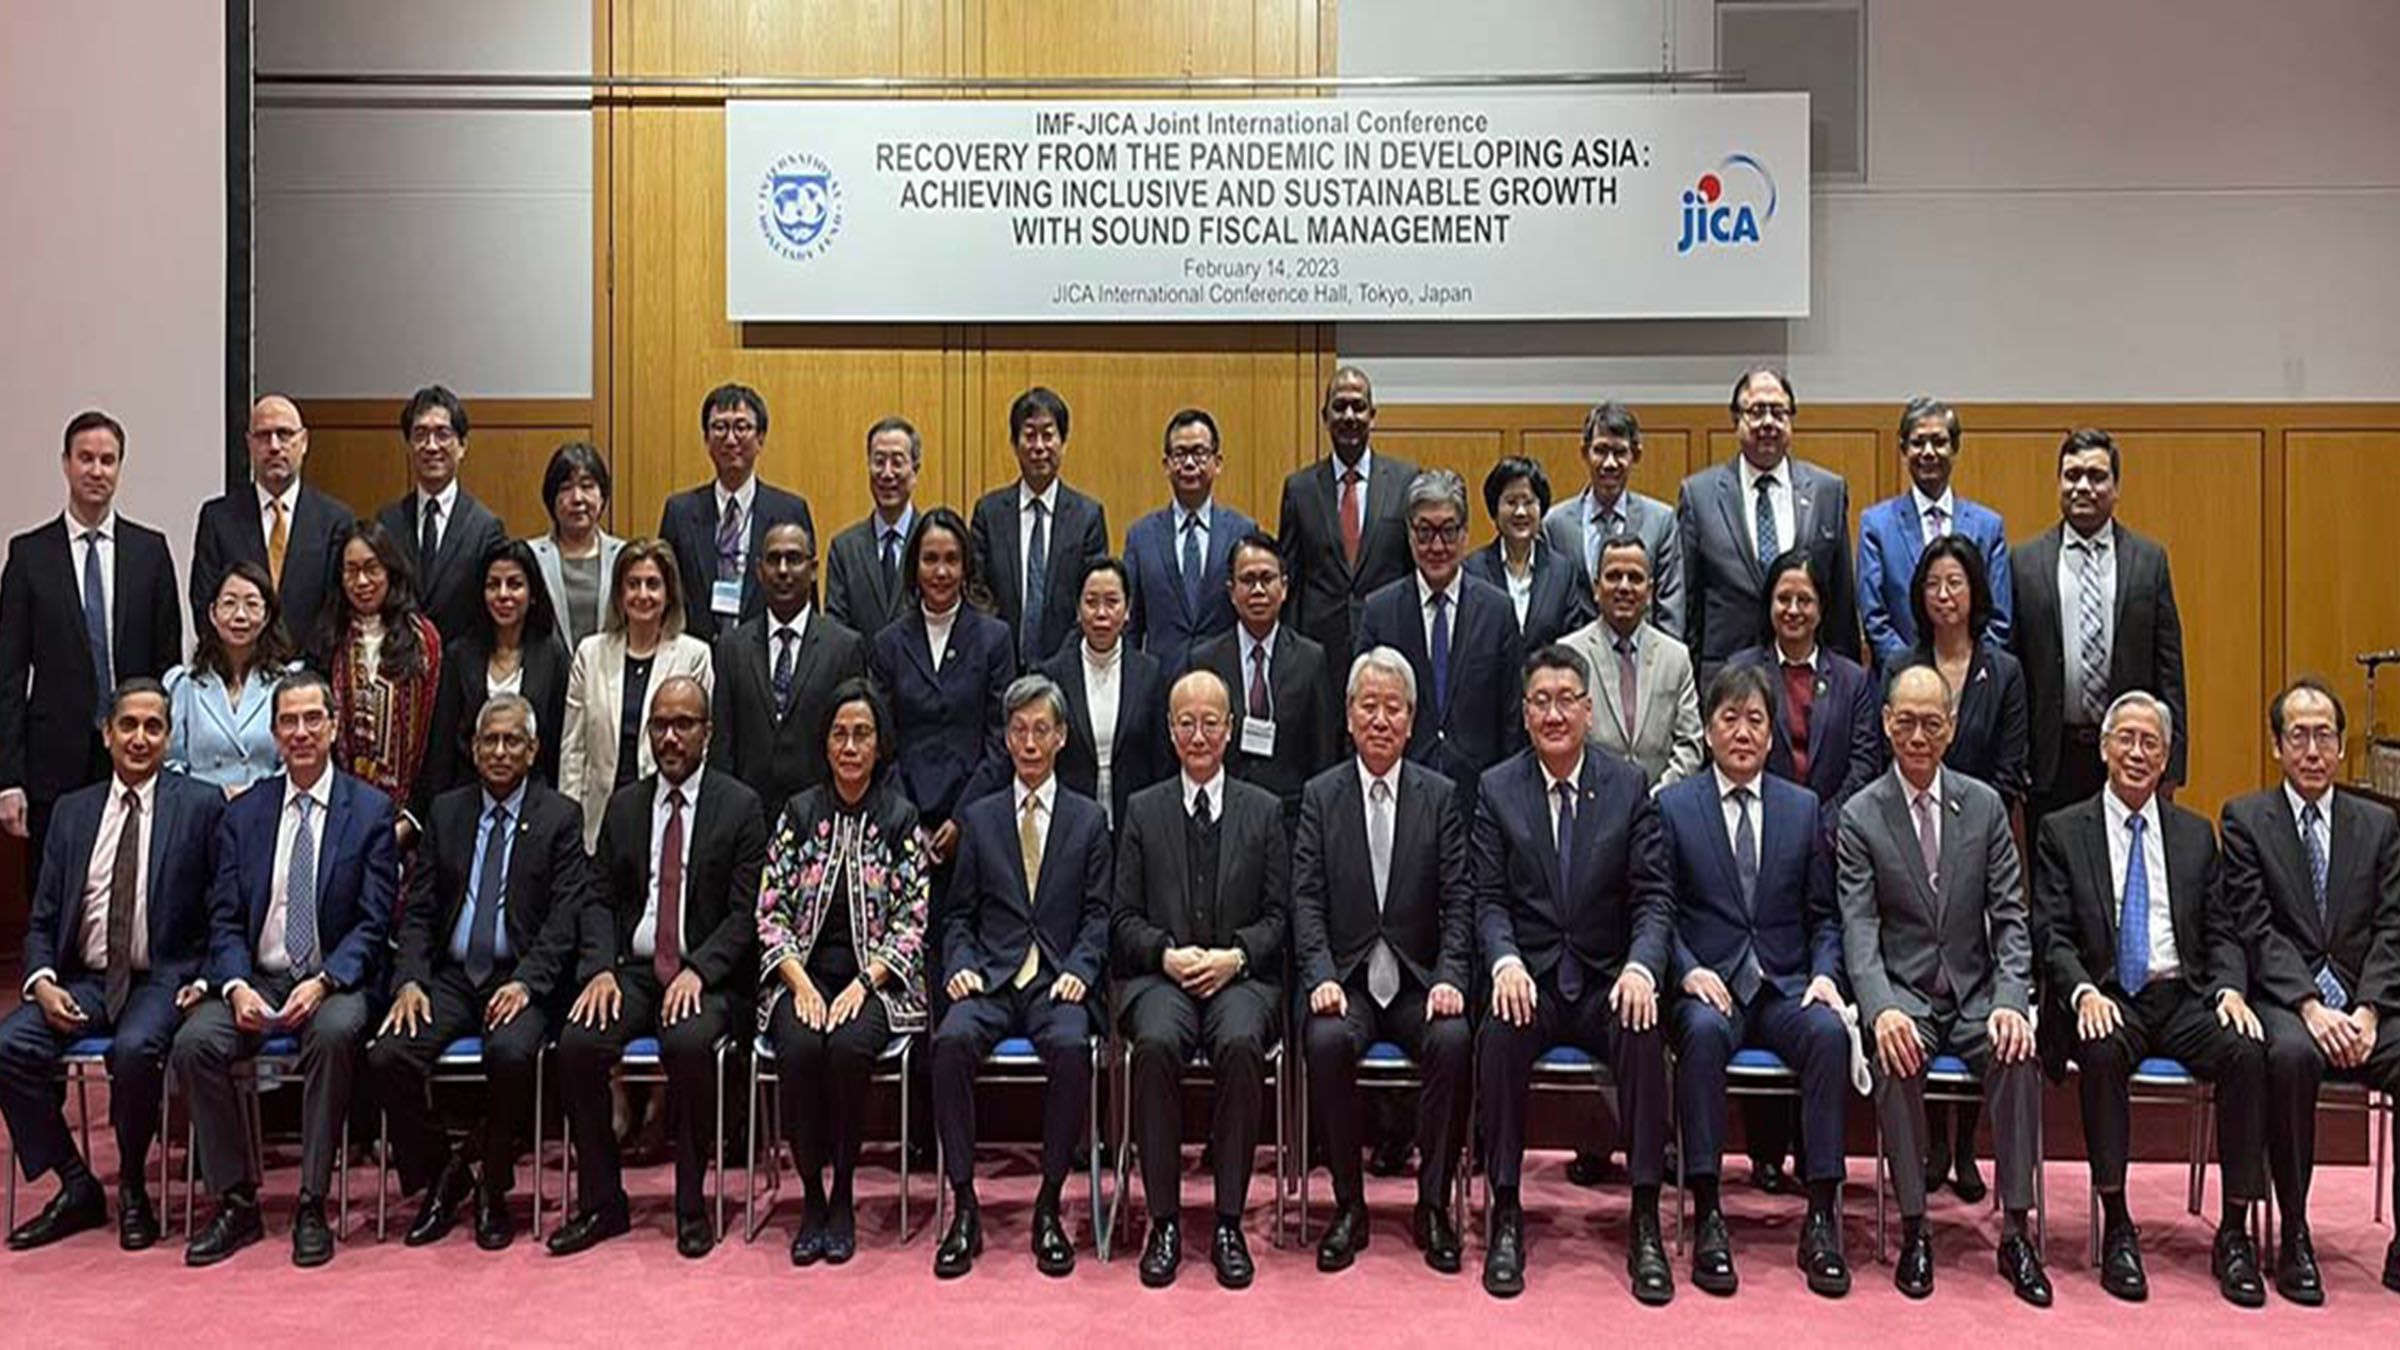 BSP, DOF JOIN IMF-JICA CONFERENCE IN TOKYO